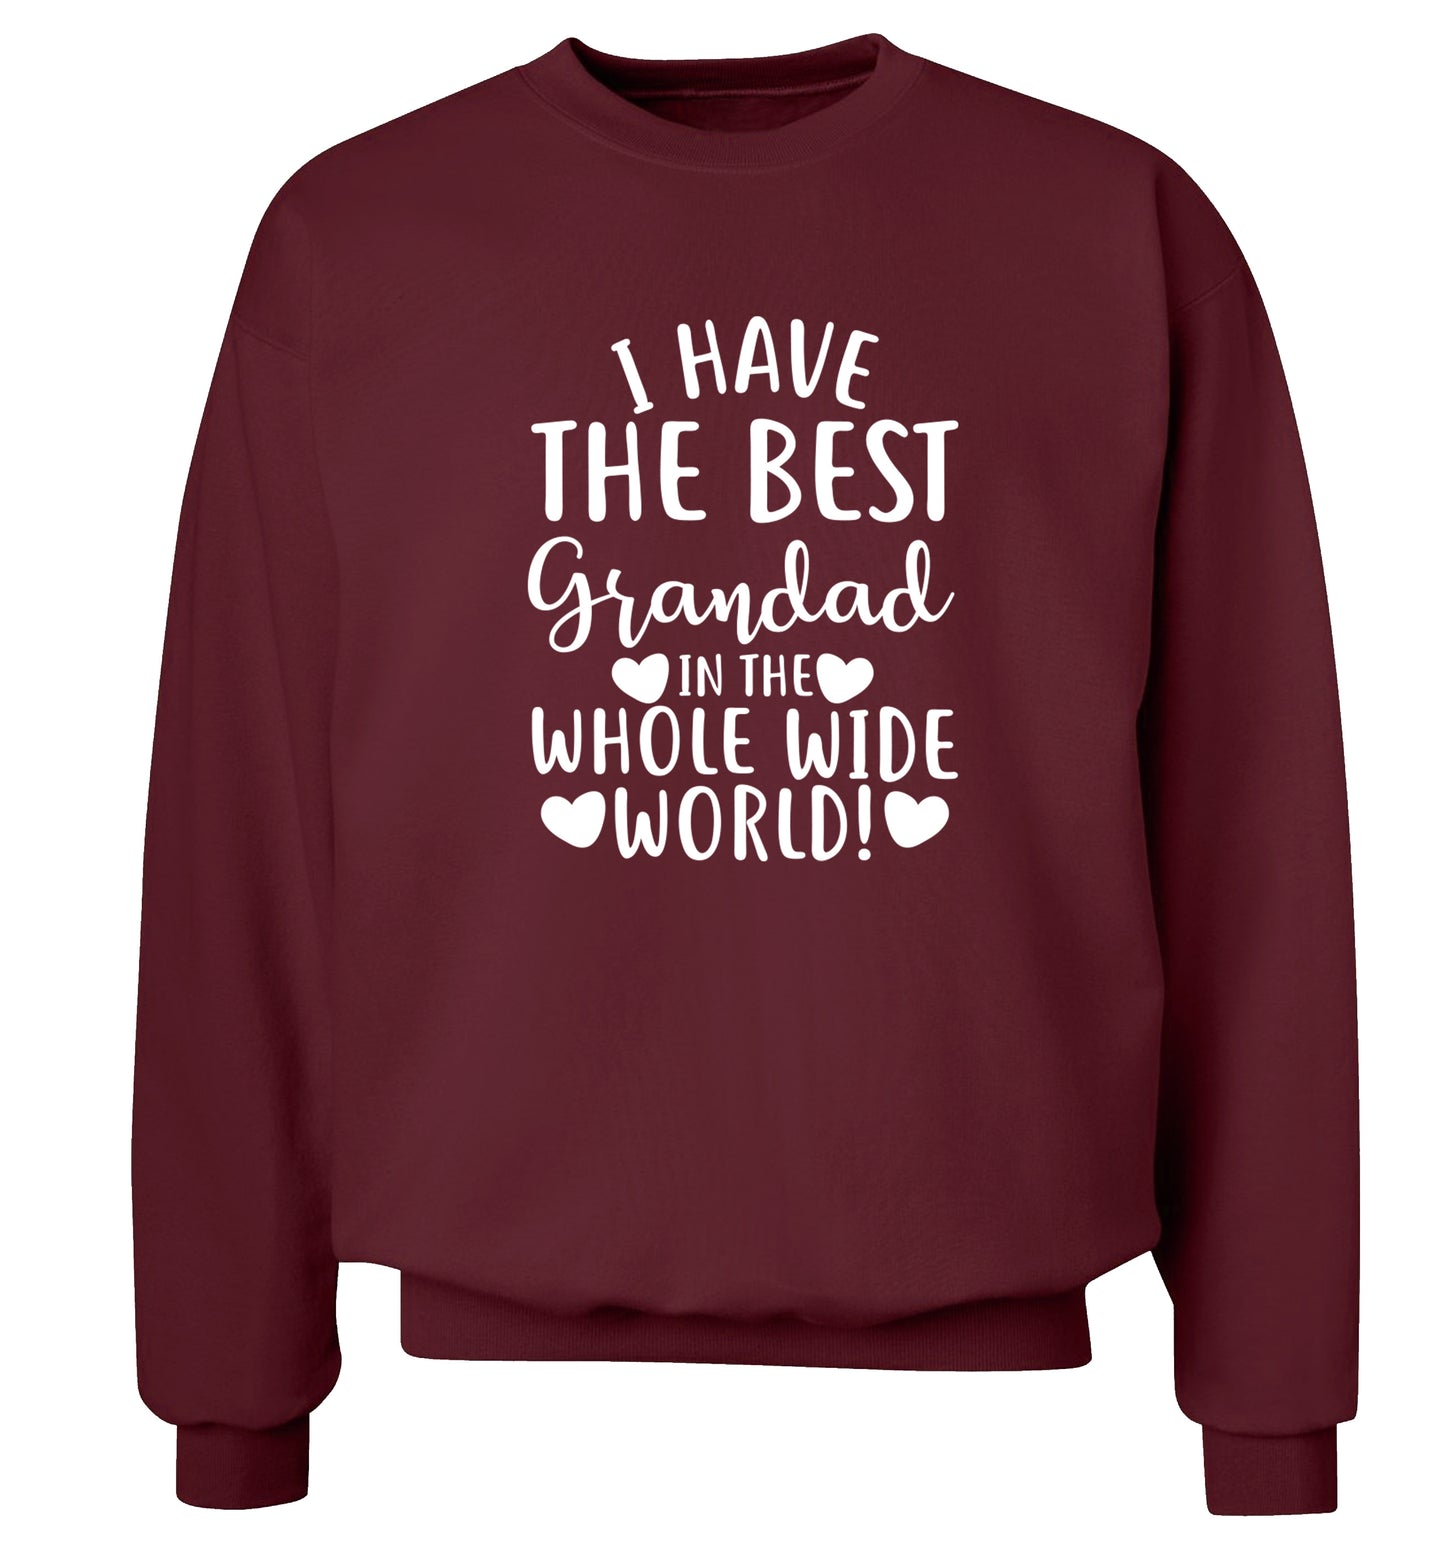 I have the best grandad in the whole wide world! Adult's unisex maroon Sweater 2XL